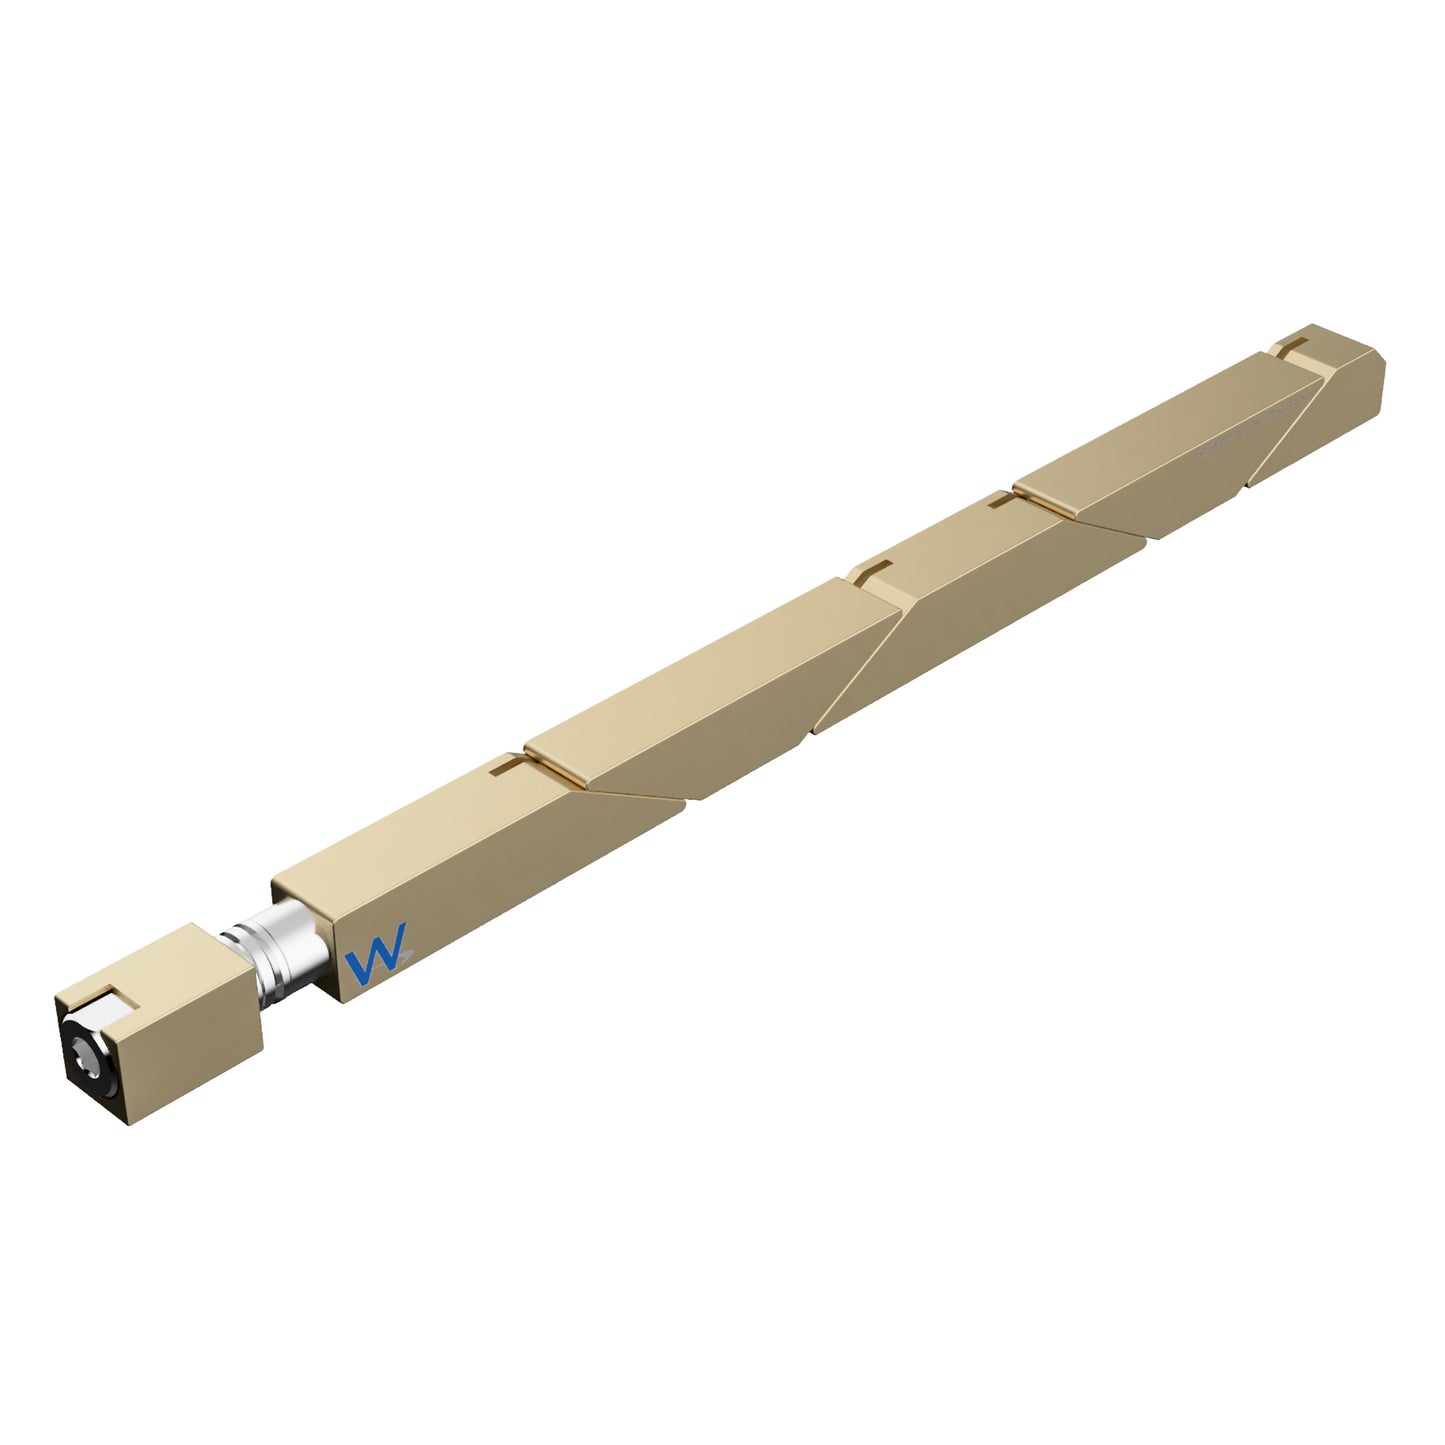 SW5-475-270-250 Max Force Wedgelock, segmented long rectulangular hardware component, Gold Chemical Film Finish